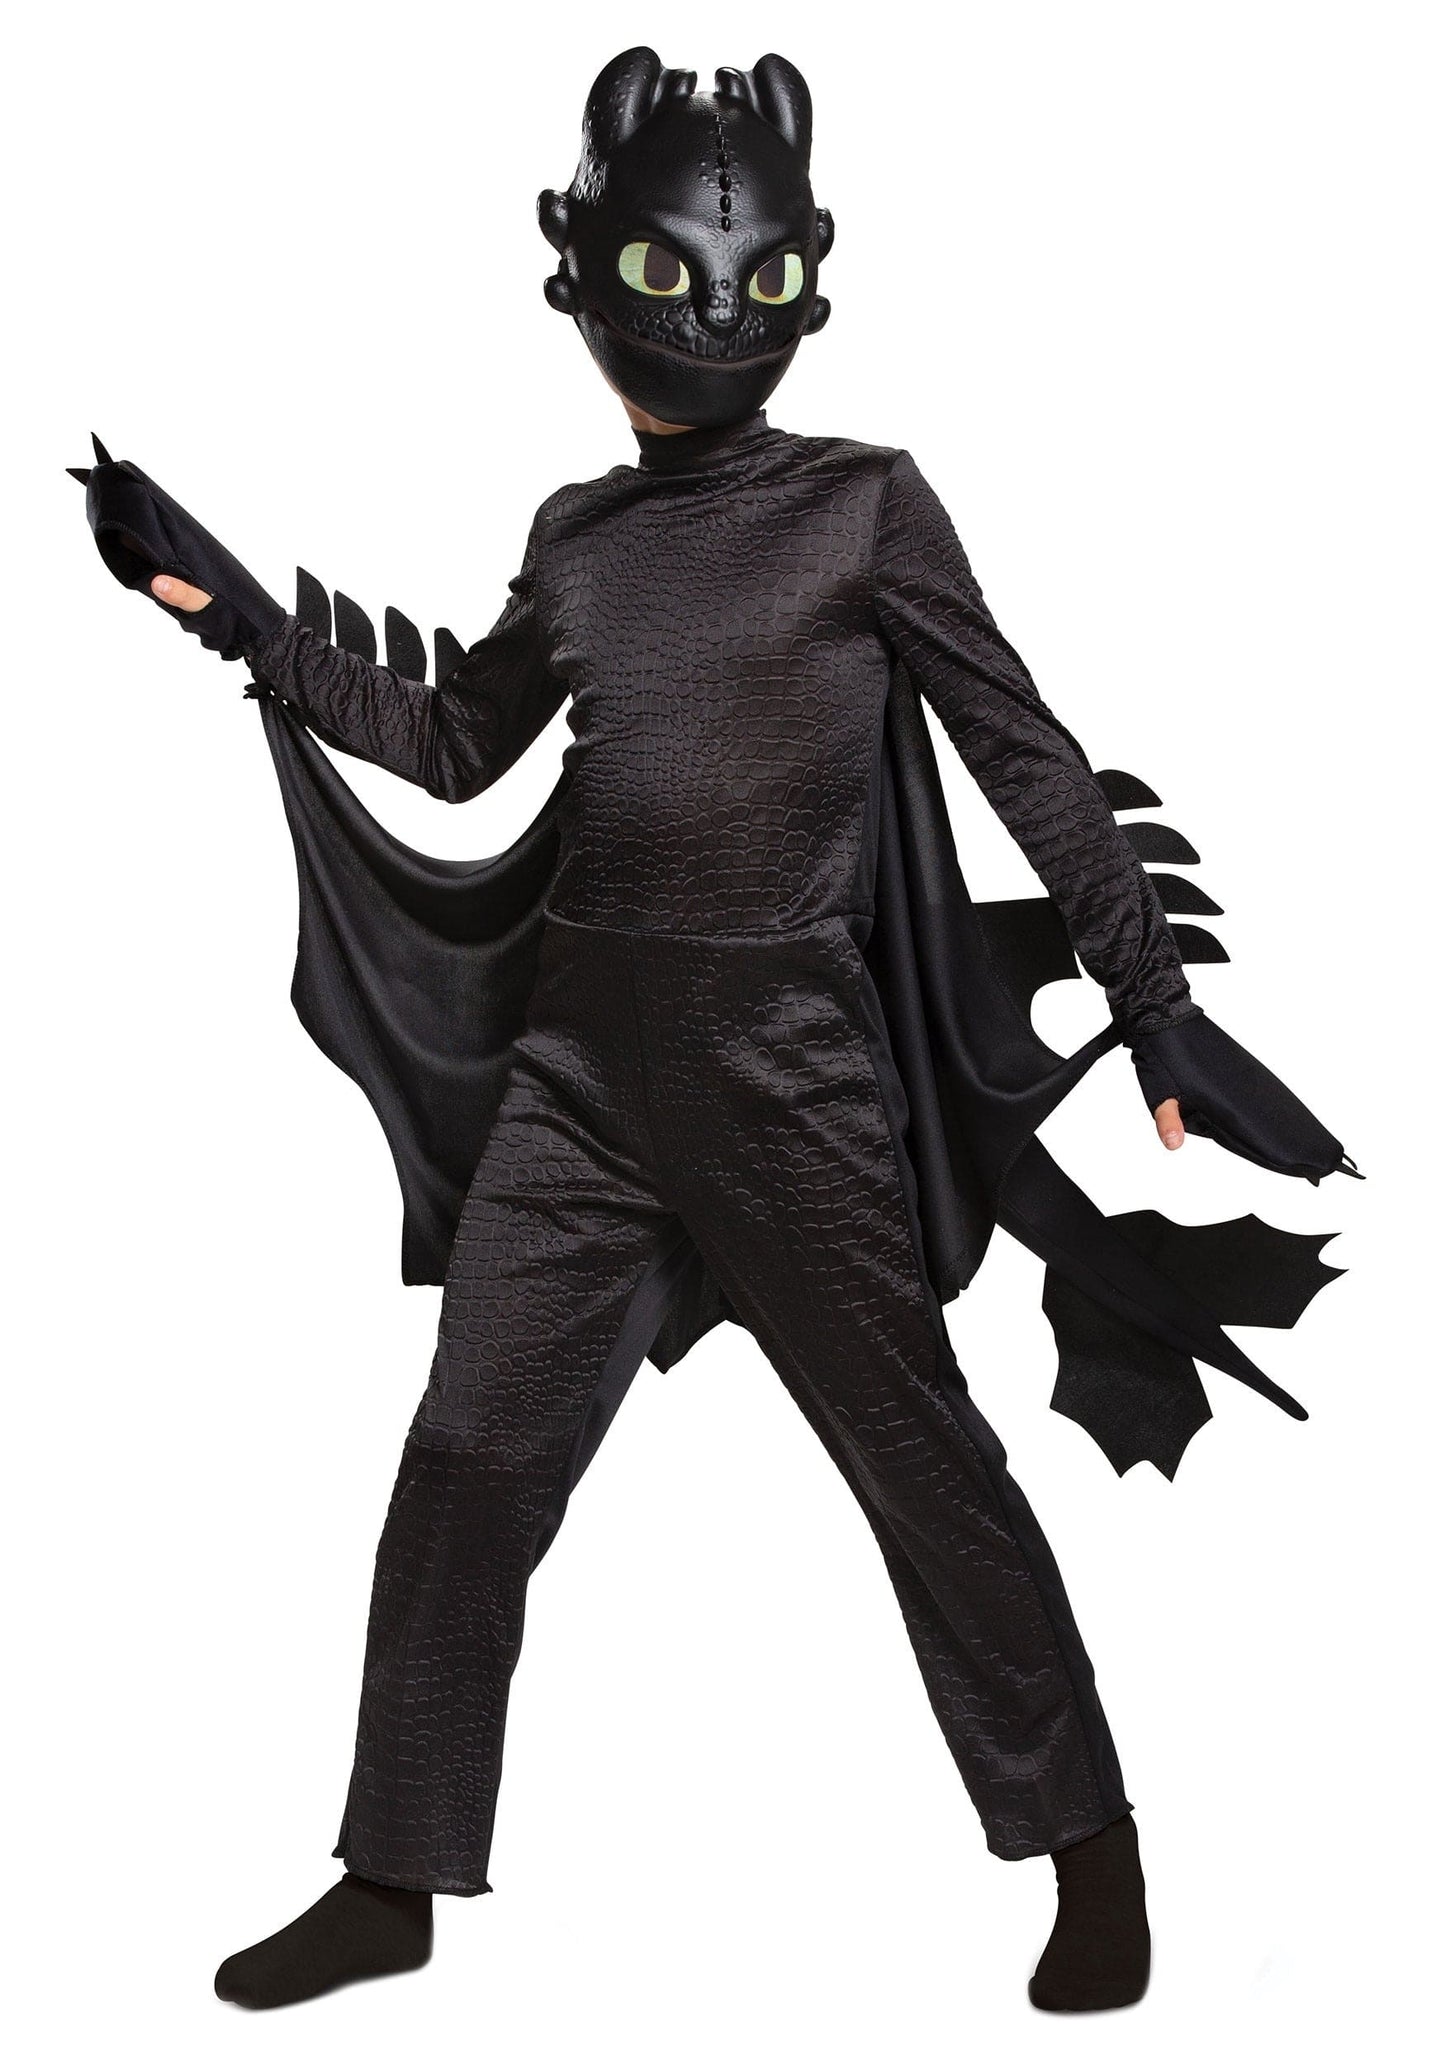 How to Train Your Dragon Toothless Dragon Deluxe Child Costume